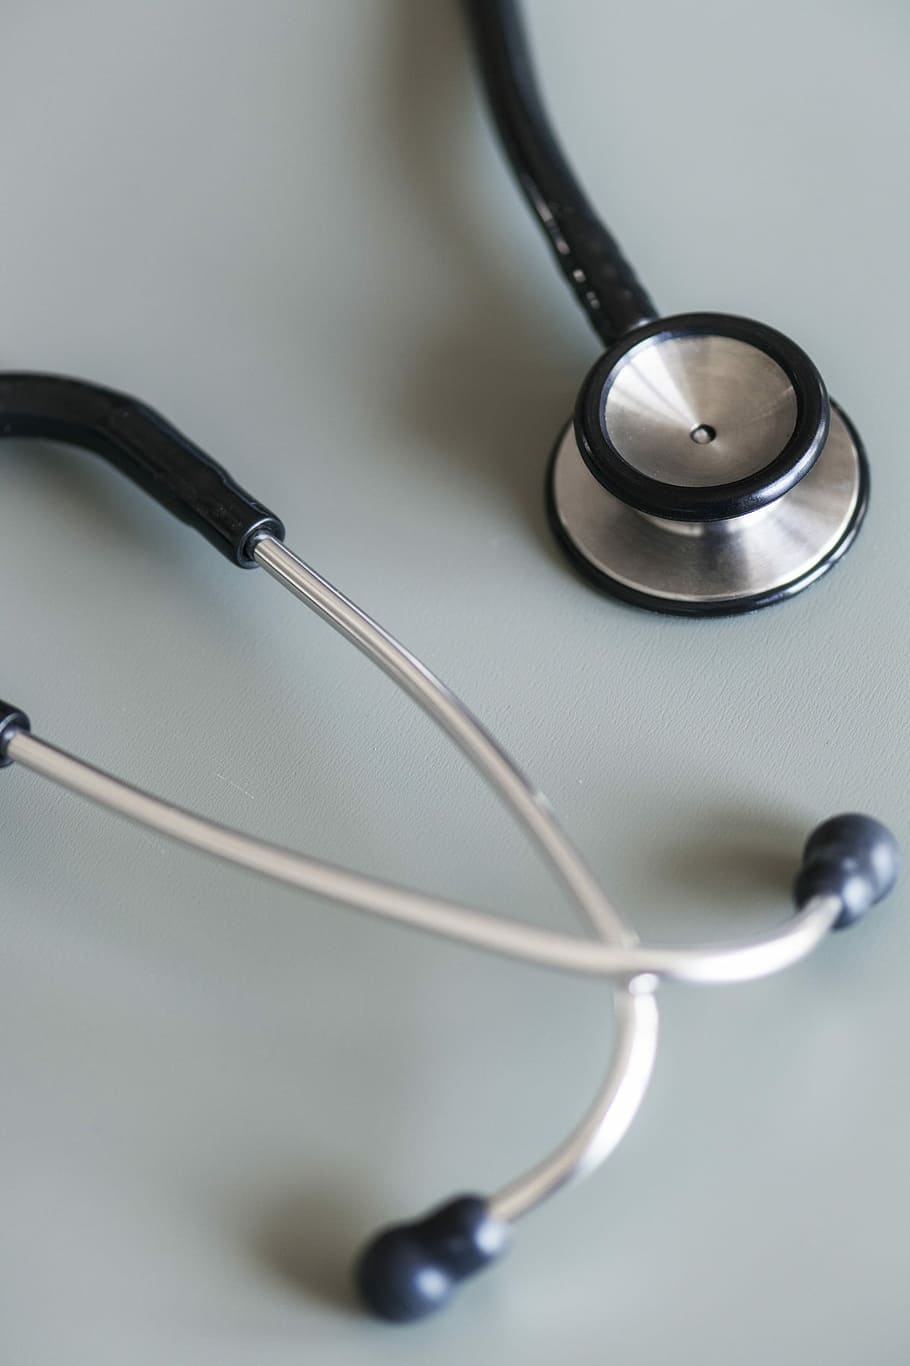 HD Wallpaper: Close Up Photography Of Gray And Black Stethoscope